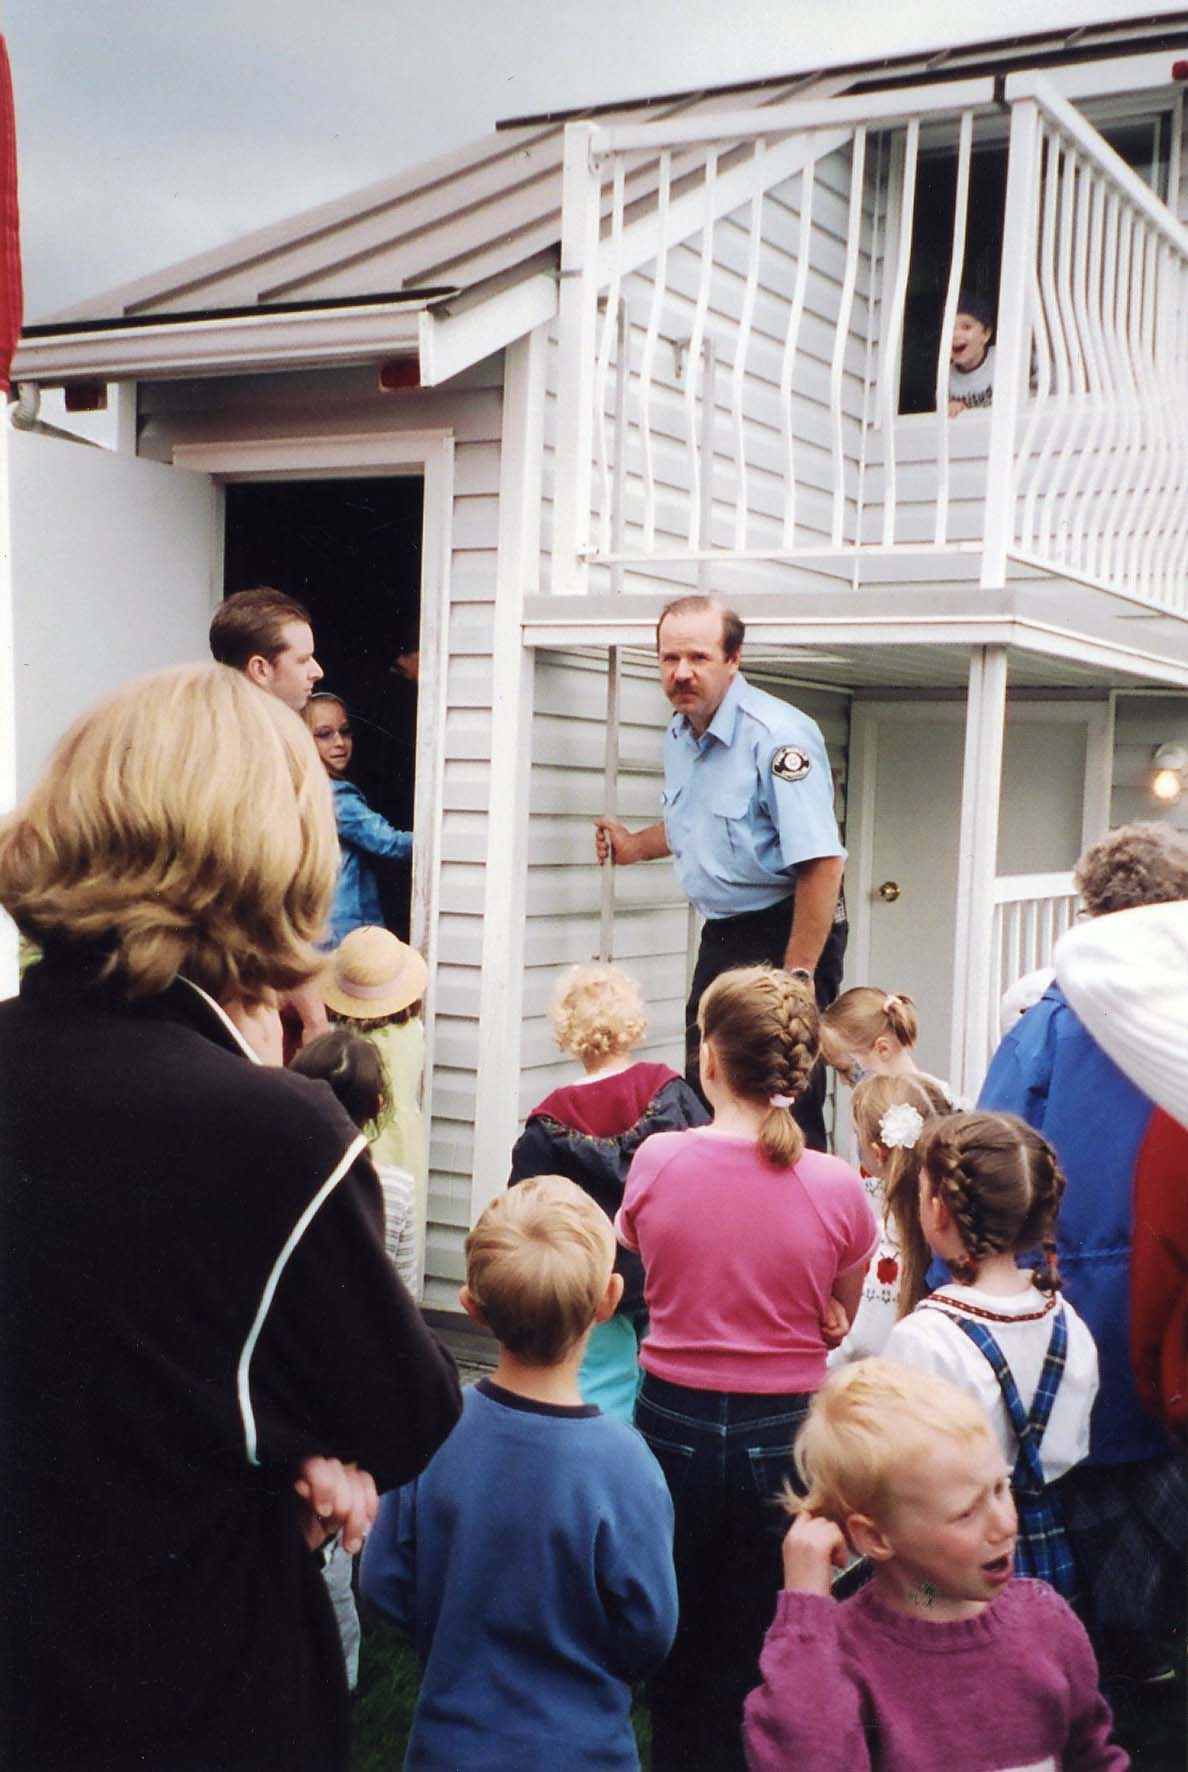 Tim Kernighan teaching at the McDonalds Fire Safety House - F48.017 Opens in new window